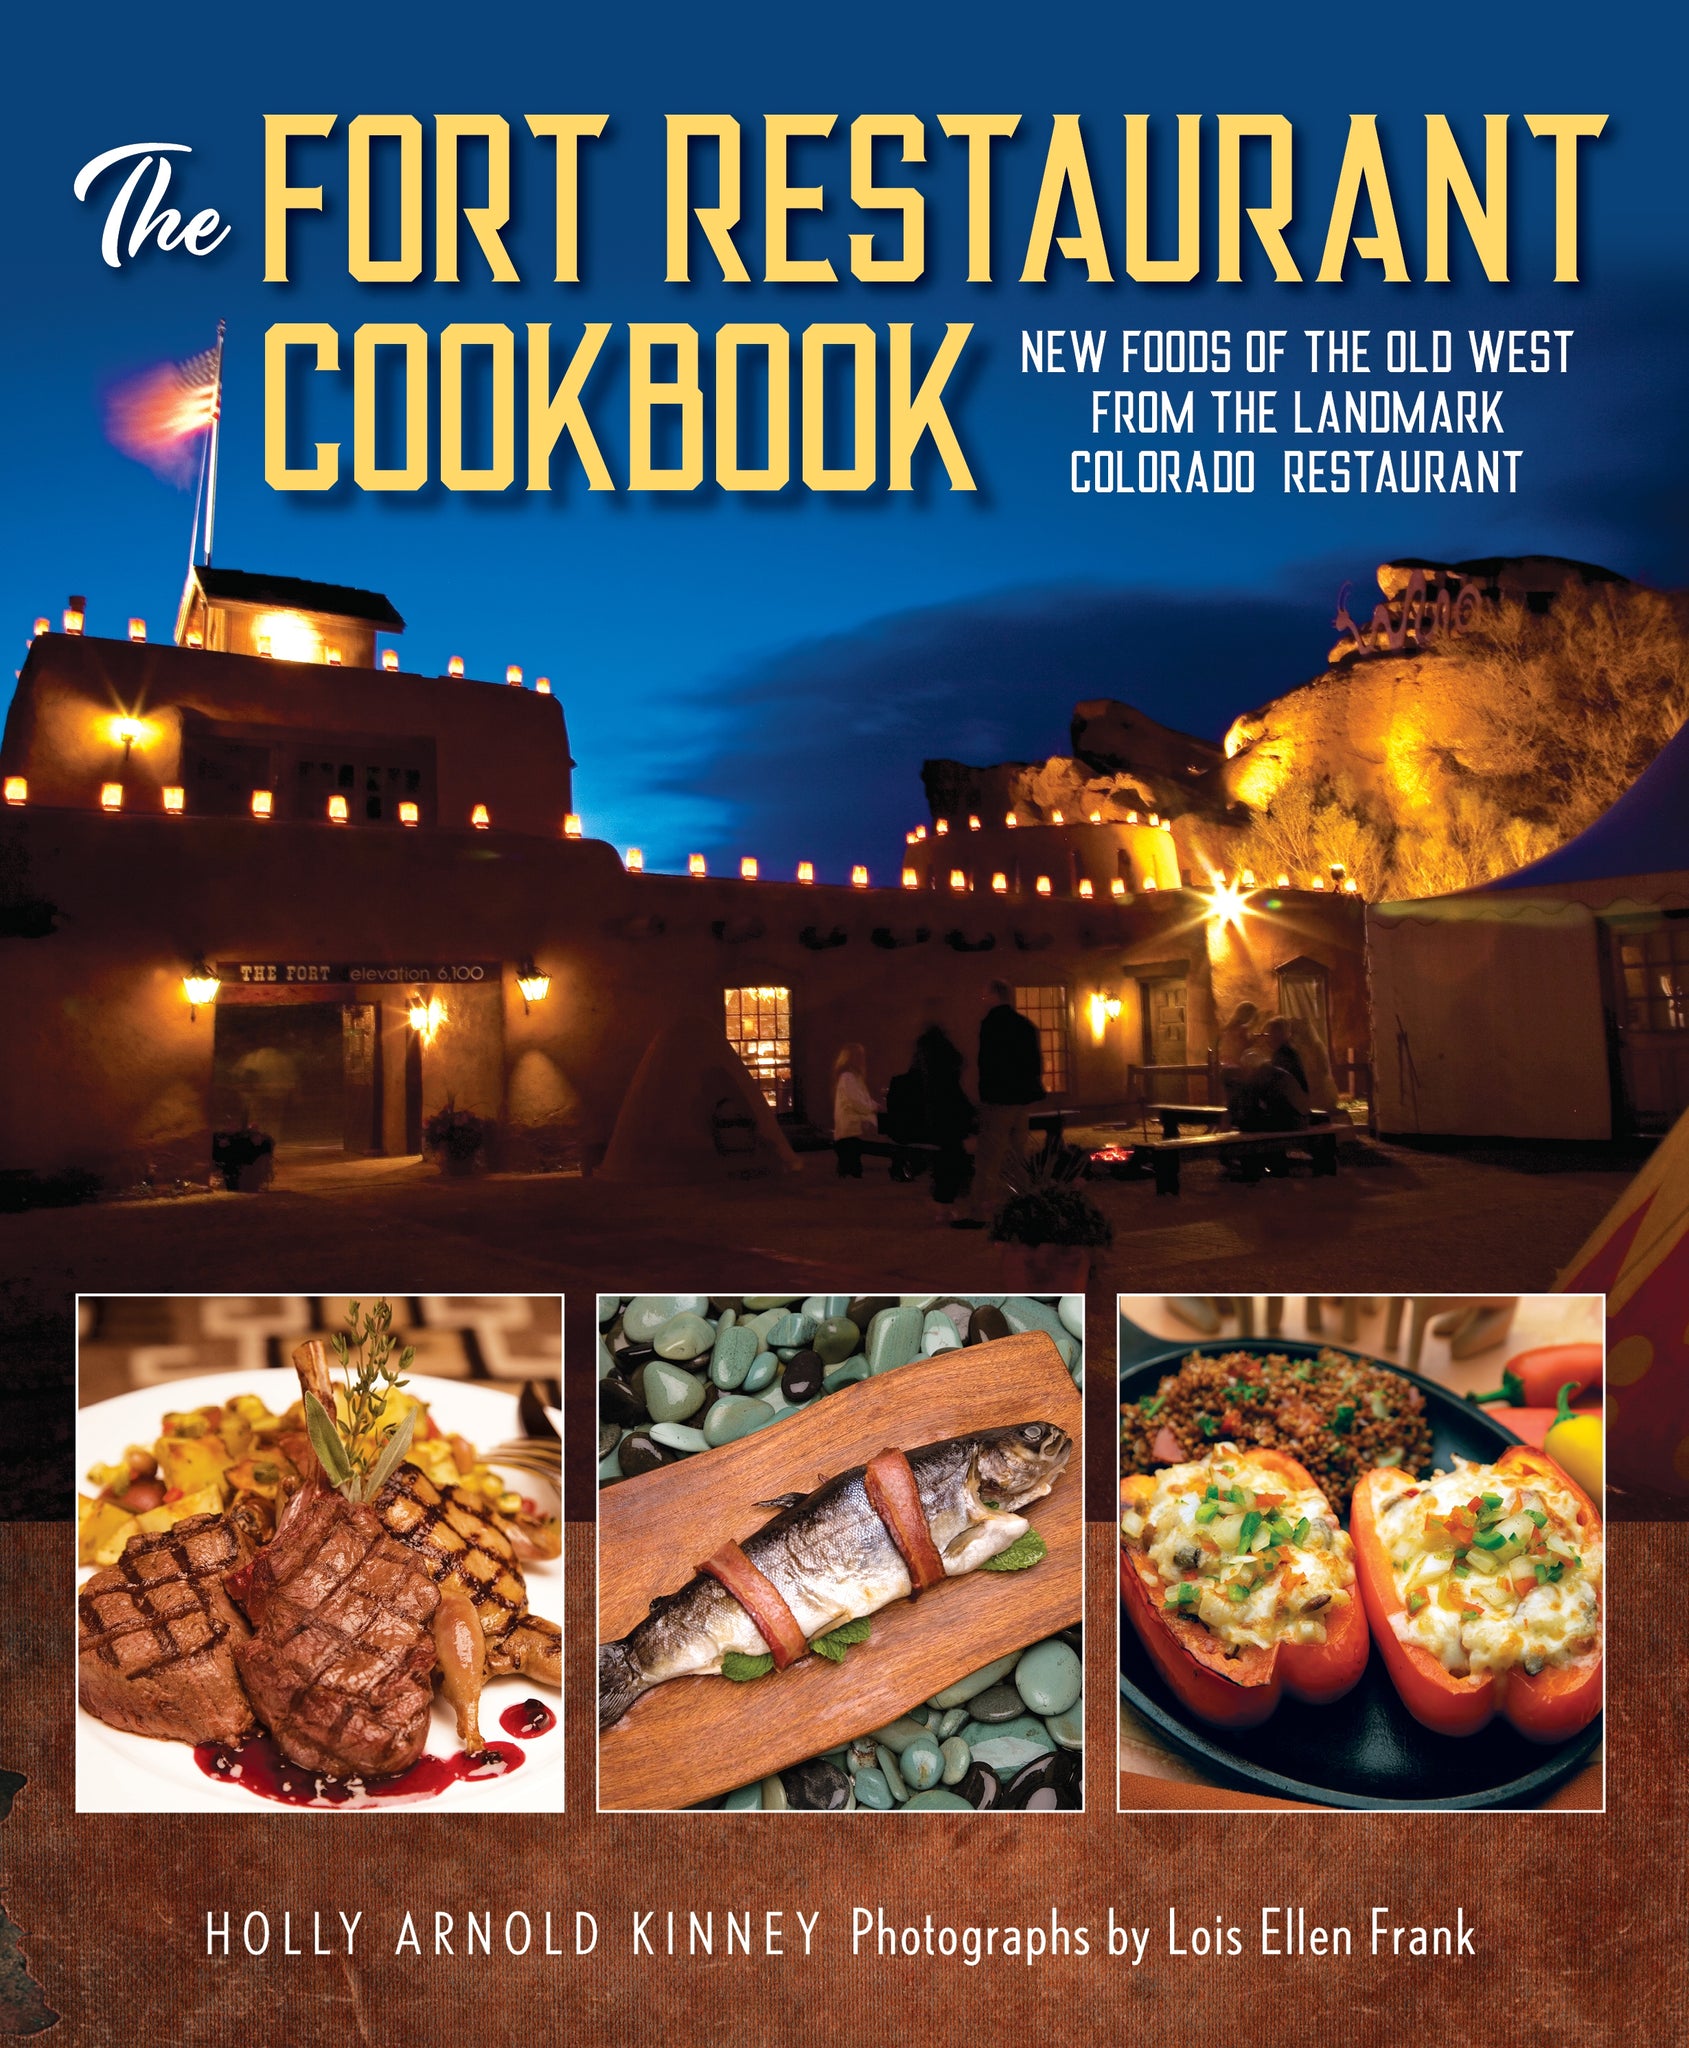 The Fort Restaurant Cookbook by Holly Arnold Kinney